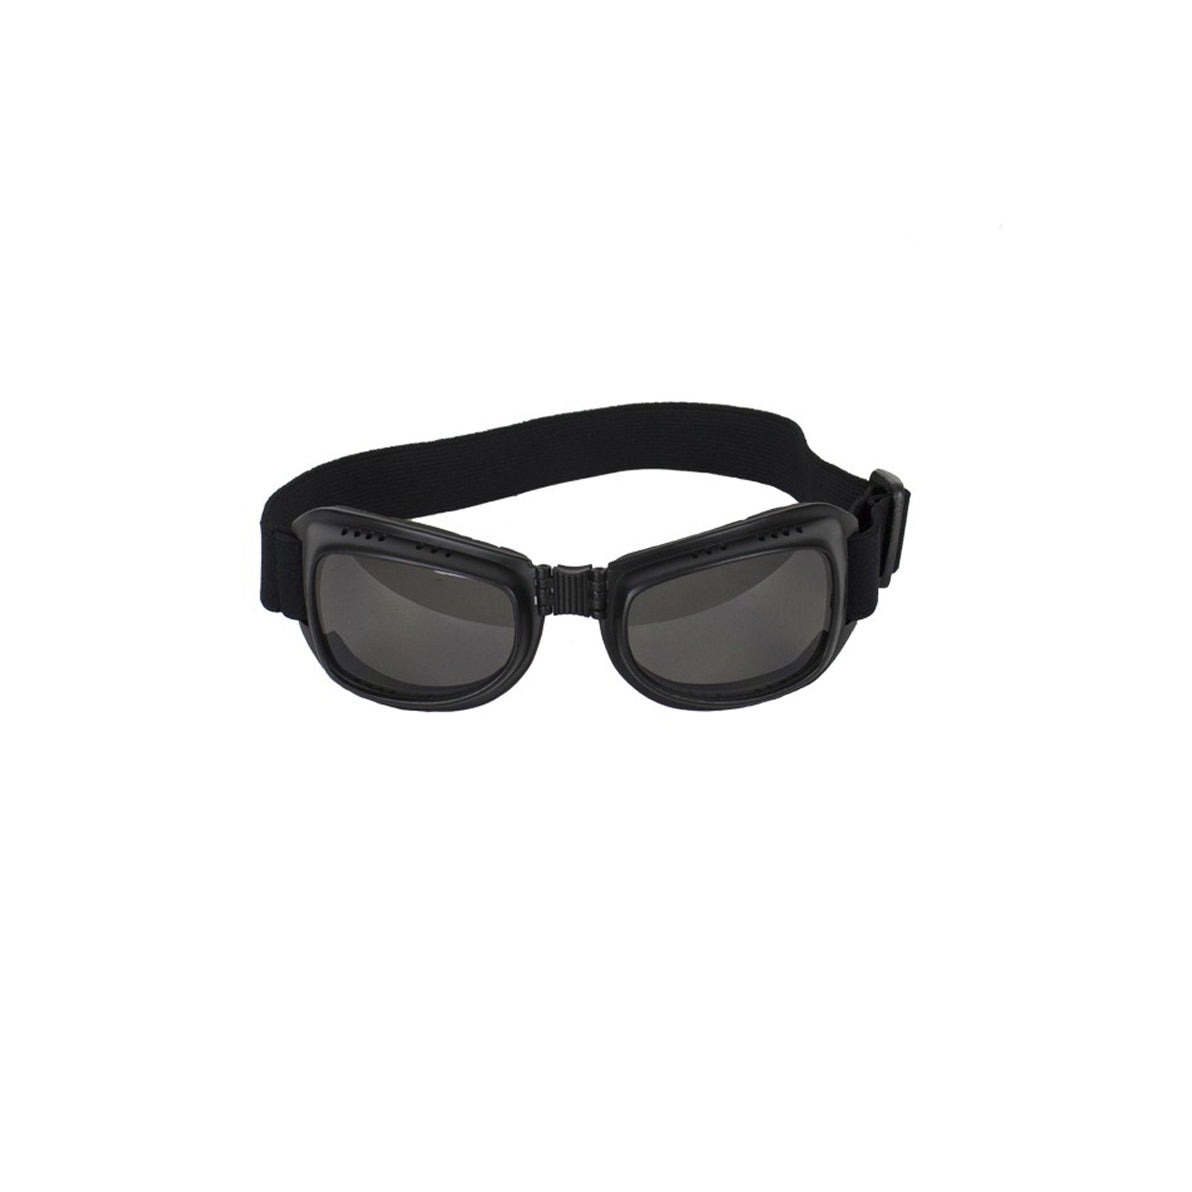 Riding Goggles With Smoke Lens